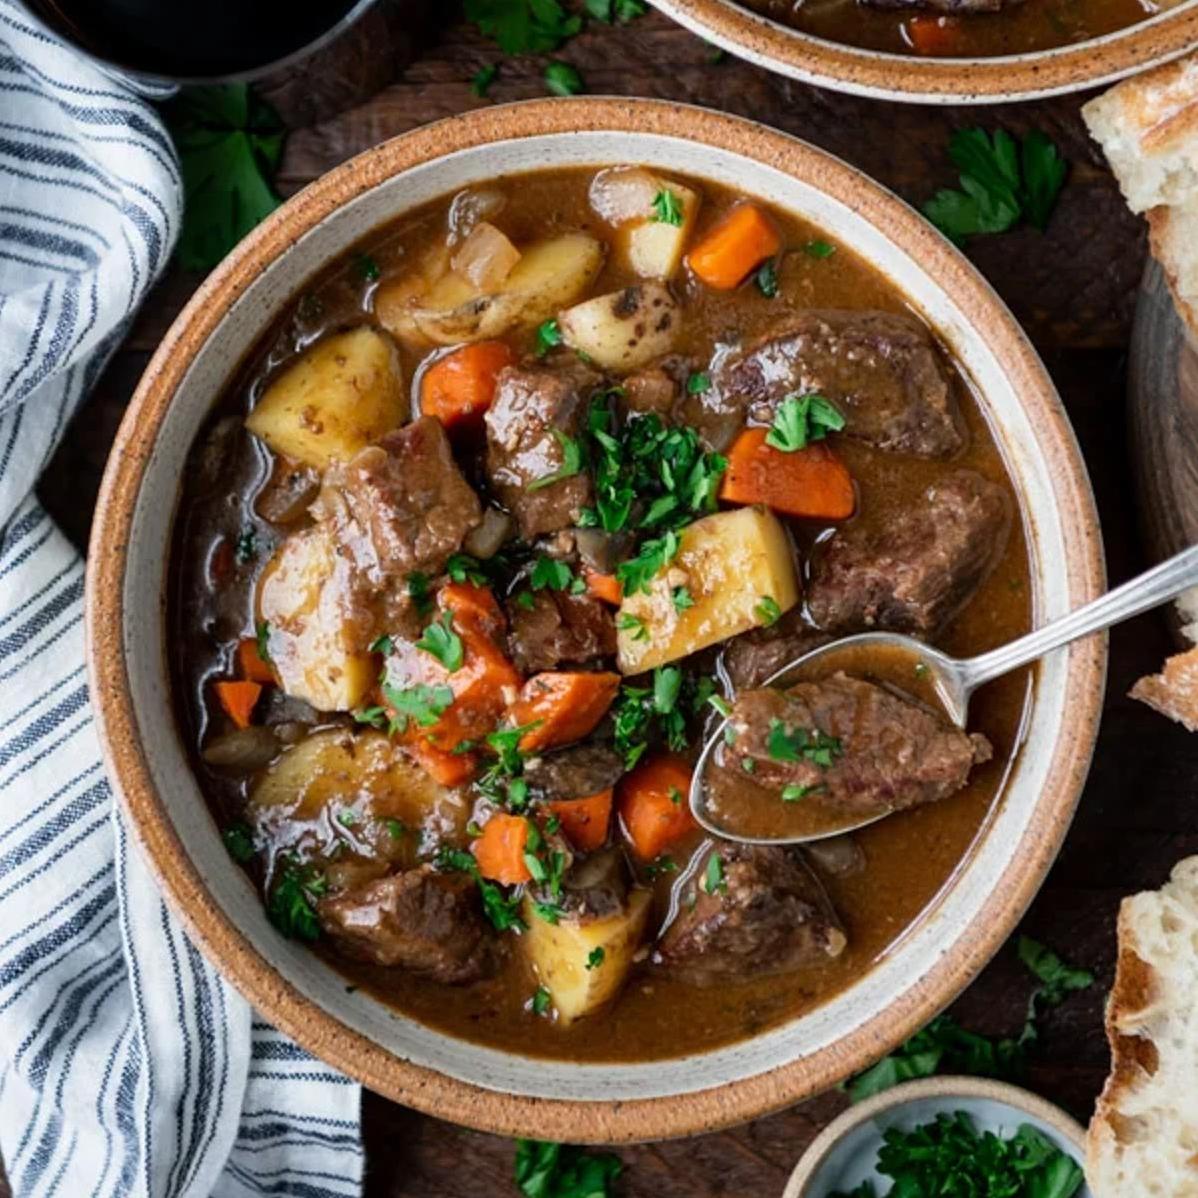  You won't even miss the meat with all the delicious flavors in this Irish Veggie Stew.